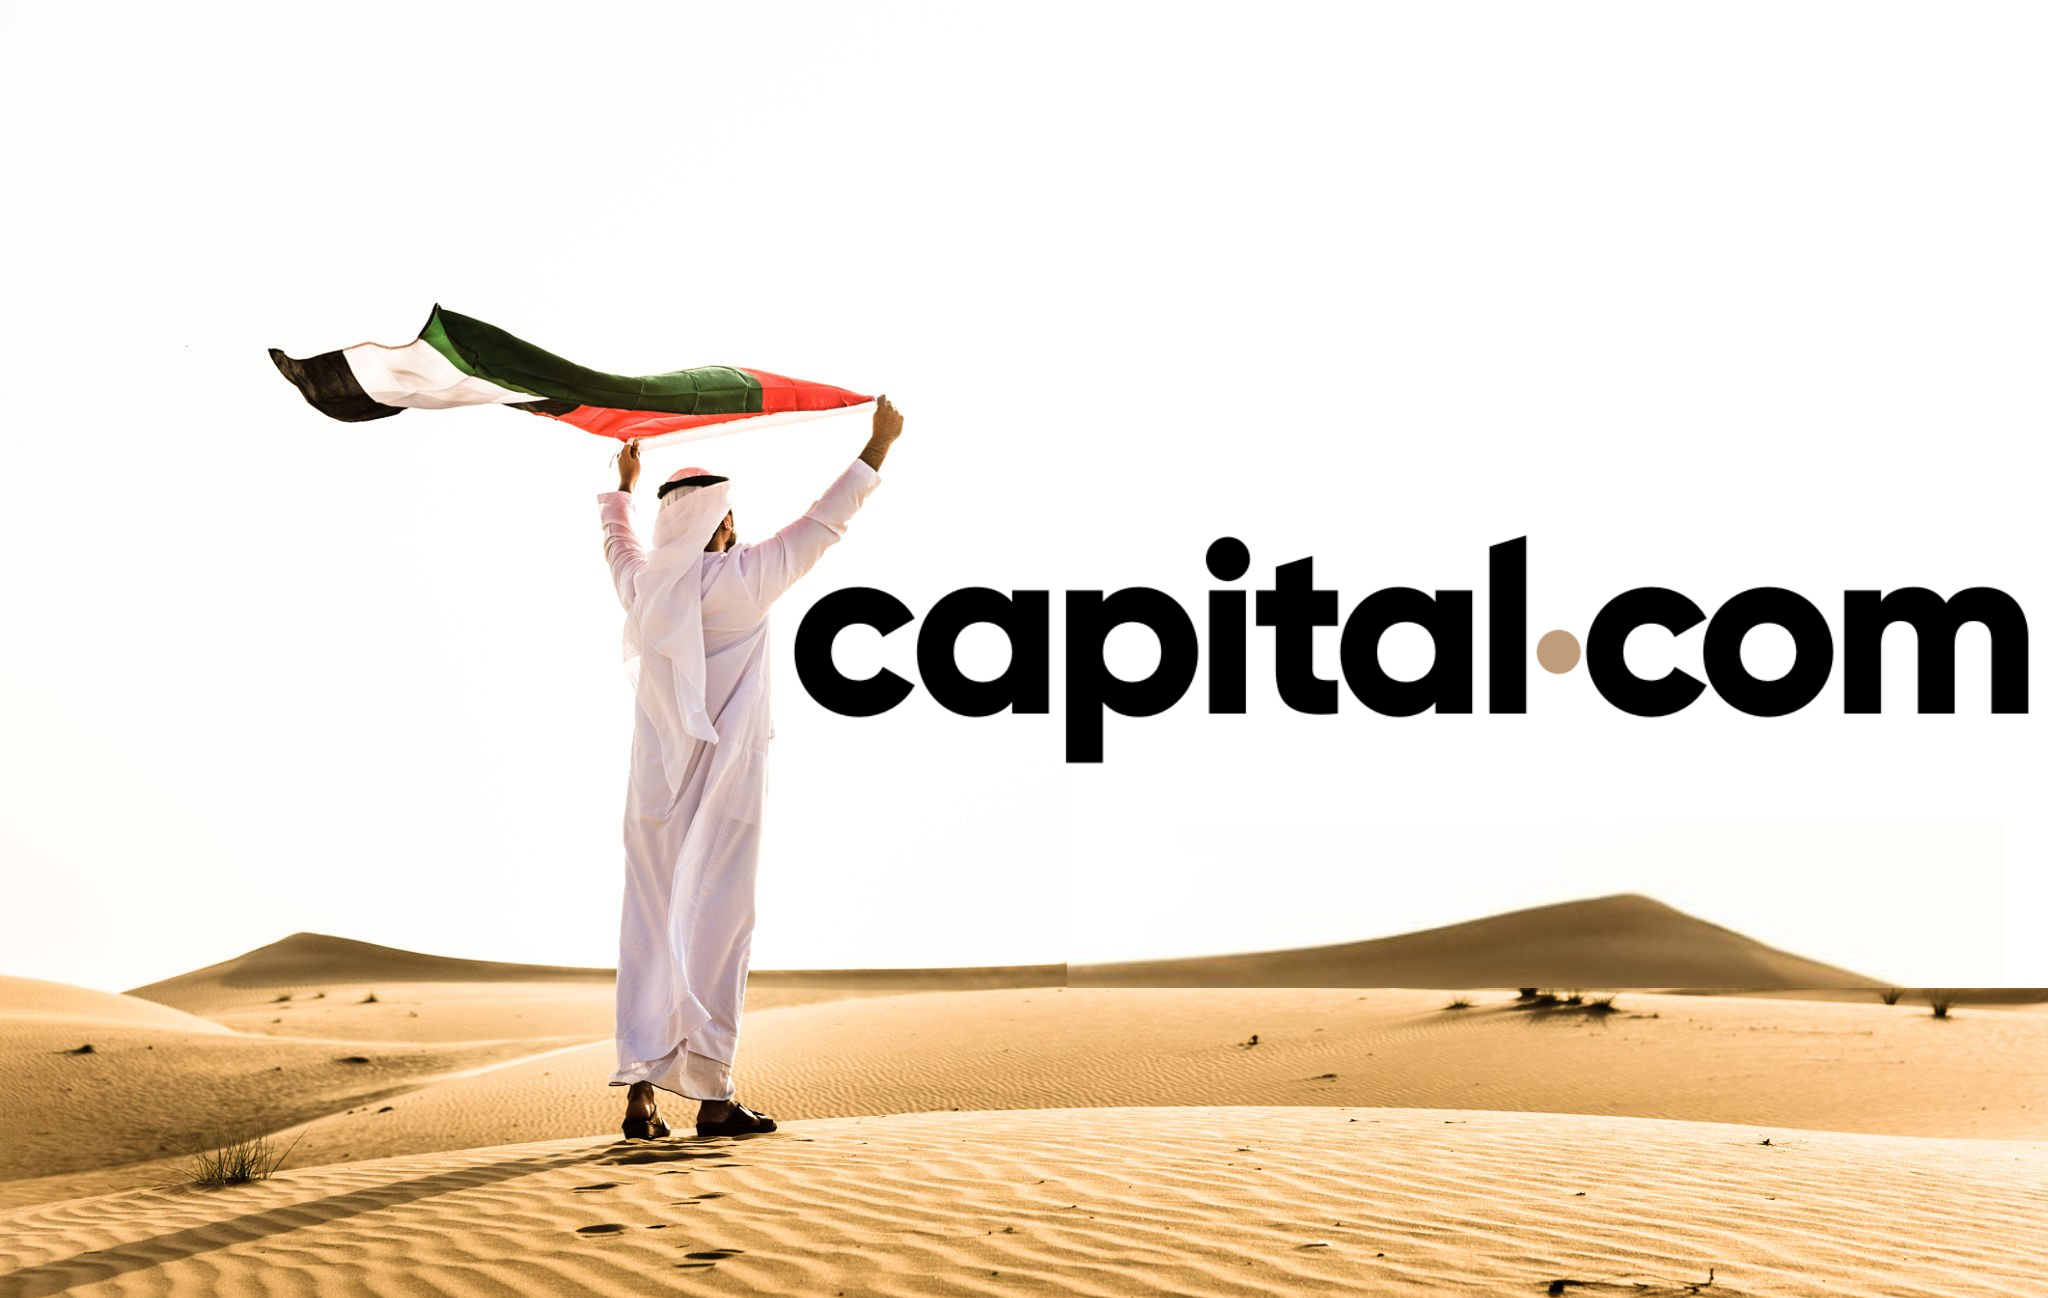 Capital.com has secured a Category 1 license from the UAE's Securities and Commodities Authority, marking a strategic shift towards expanding its Middle Eastern operations under new leadership.